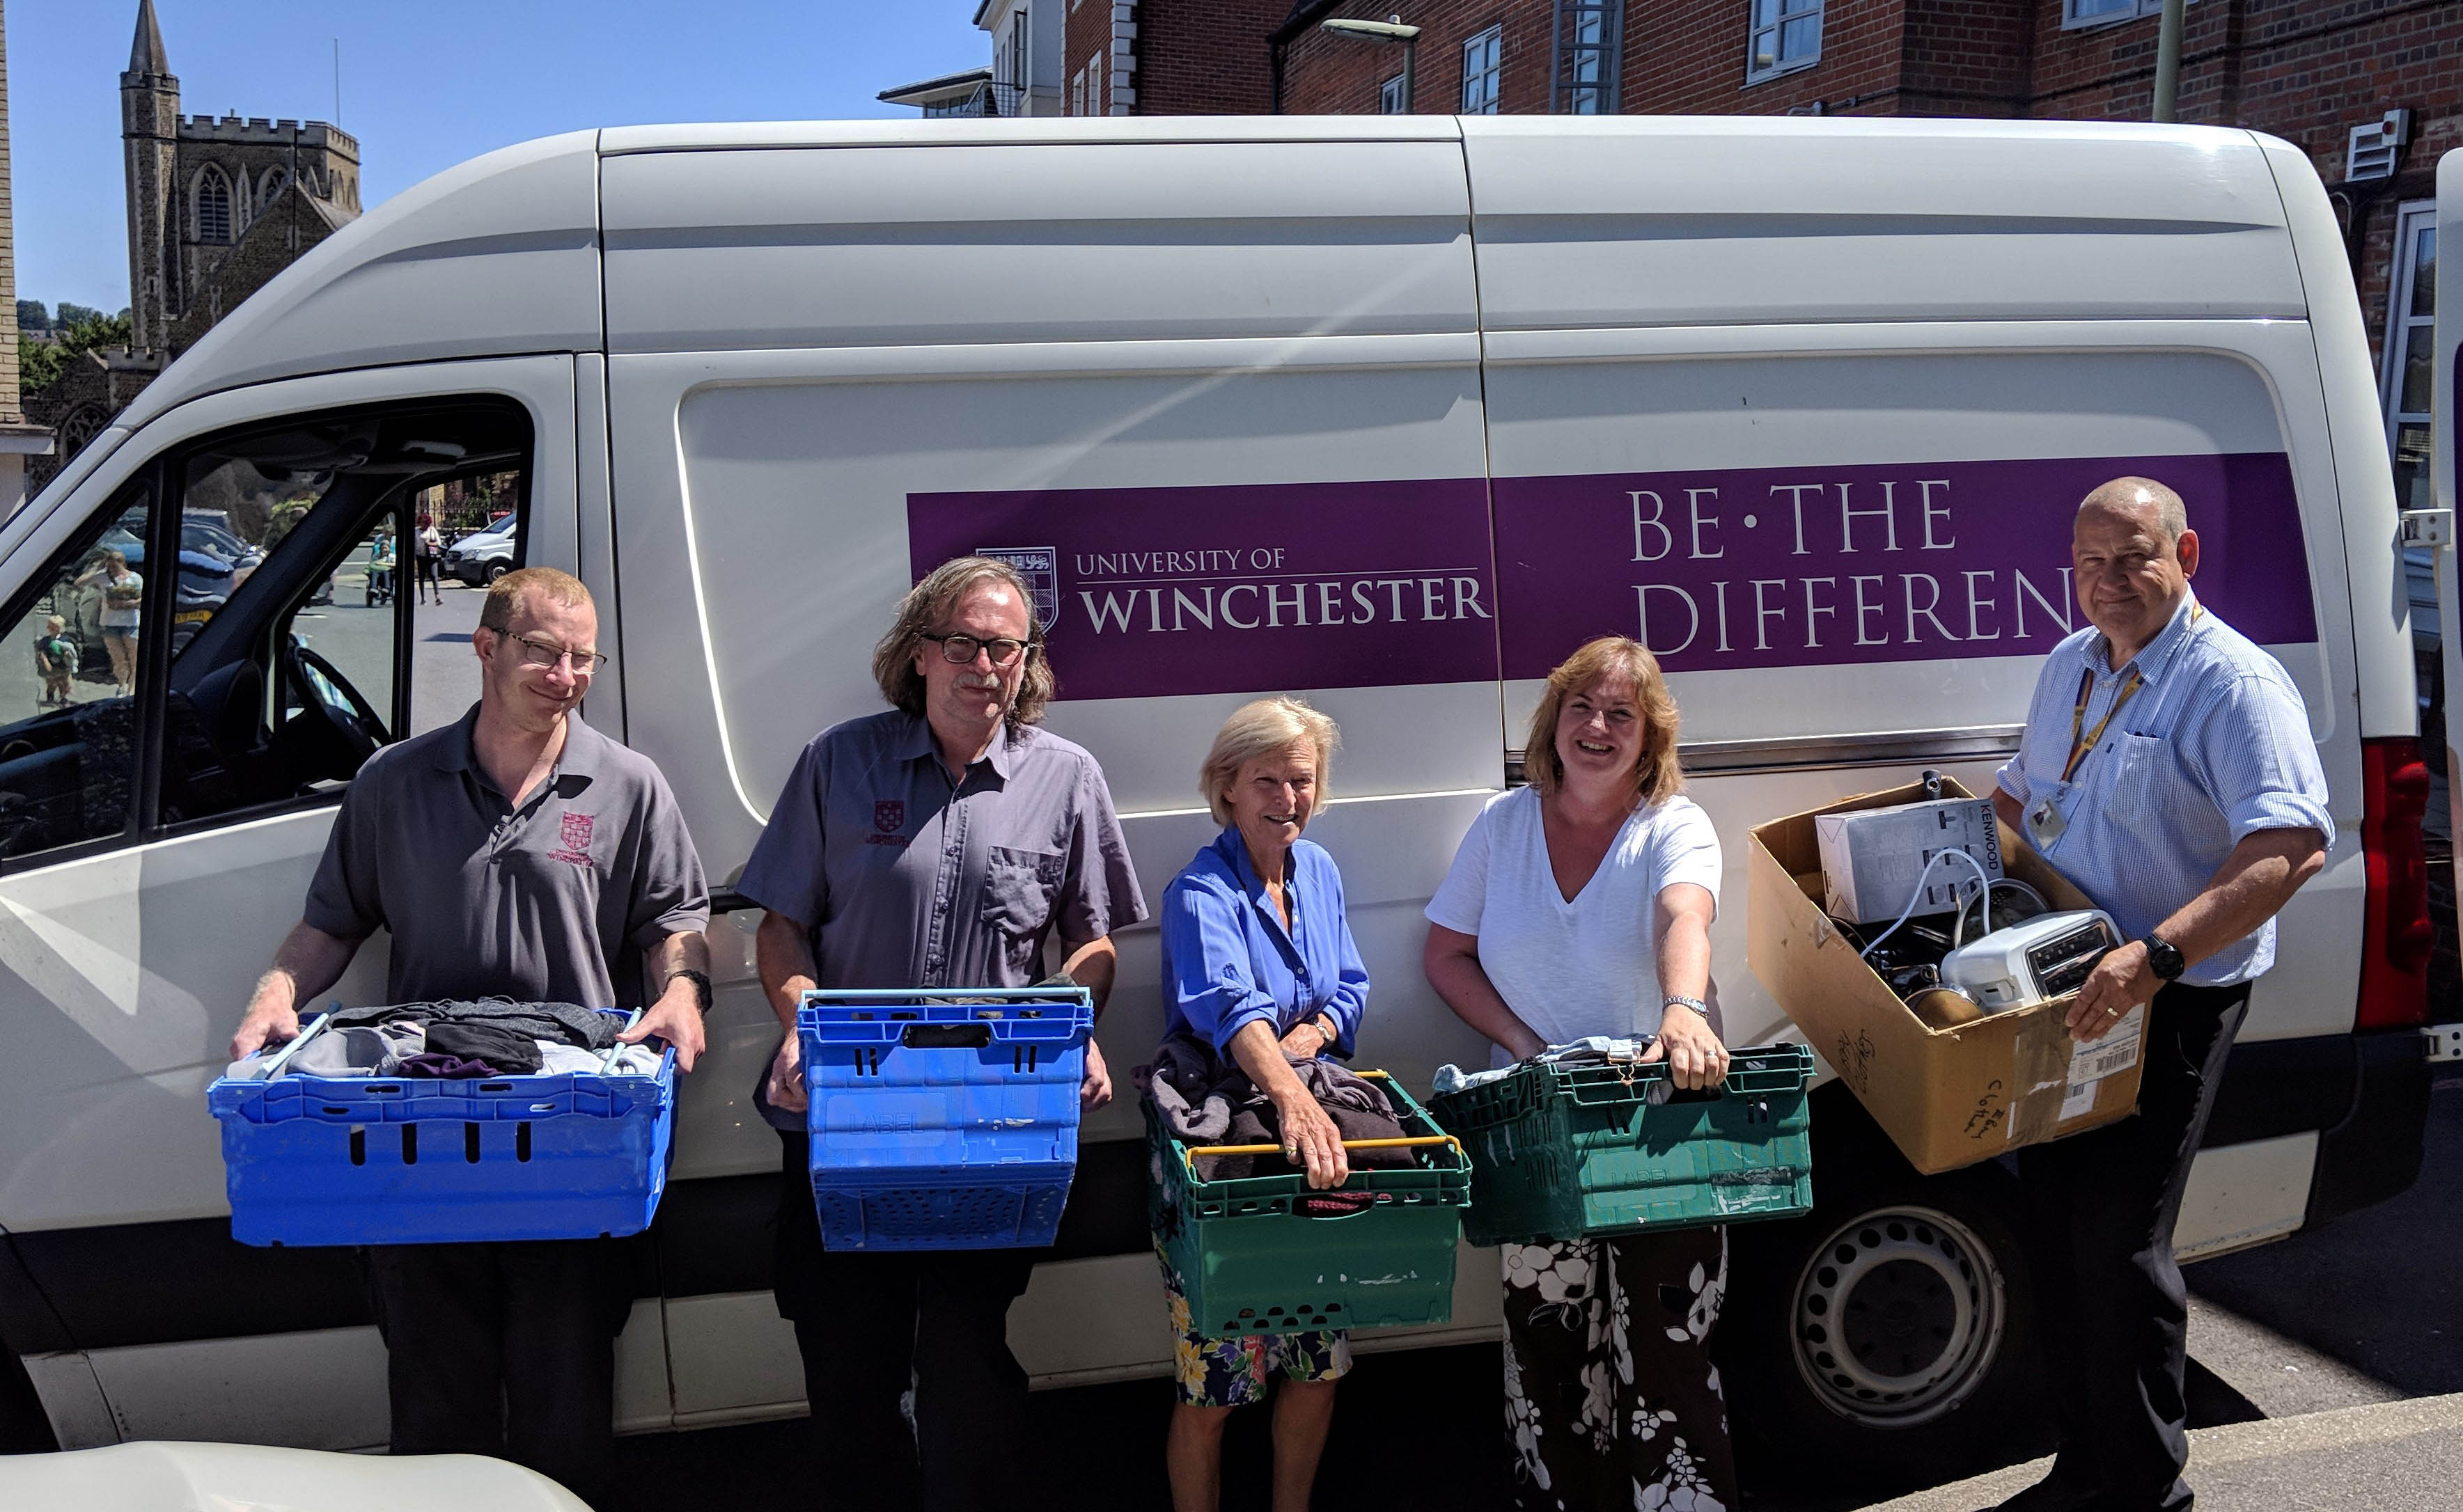 University porters and nightshelter volunteers holding donations by University delivery van